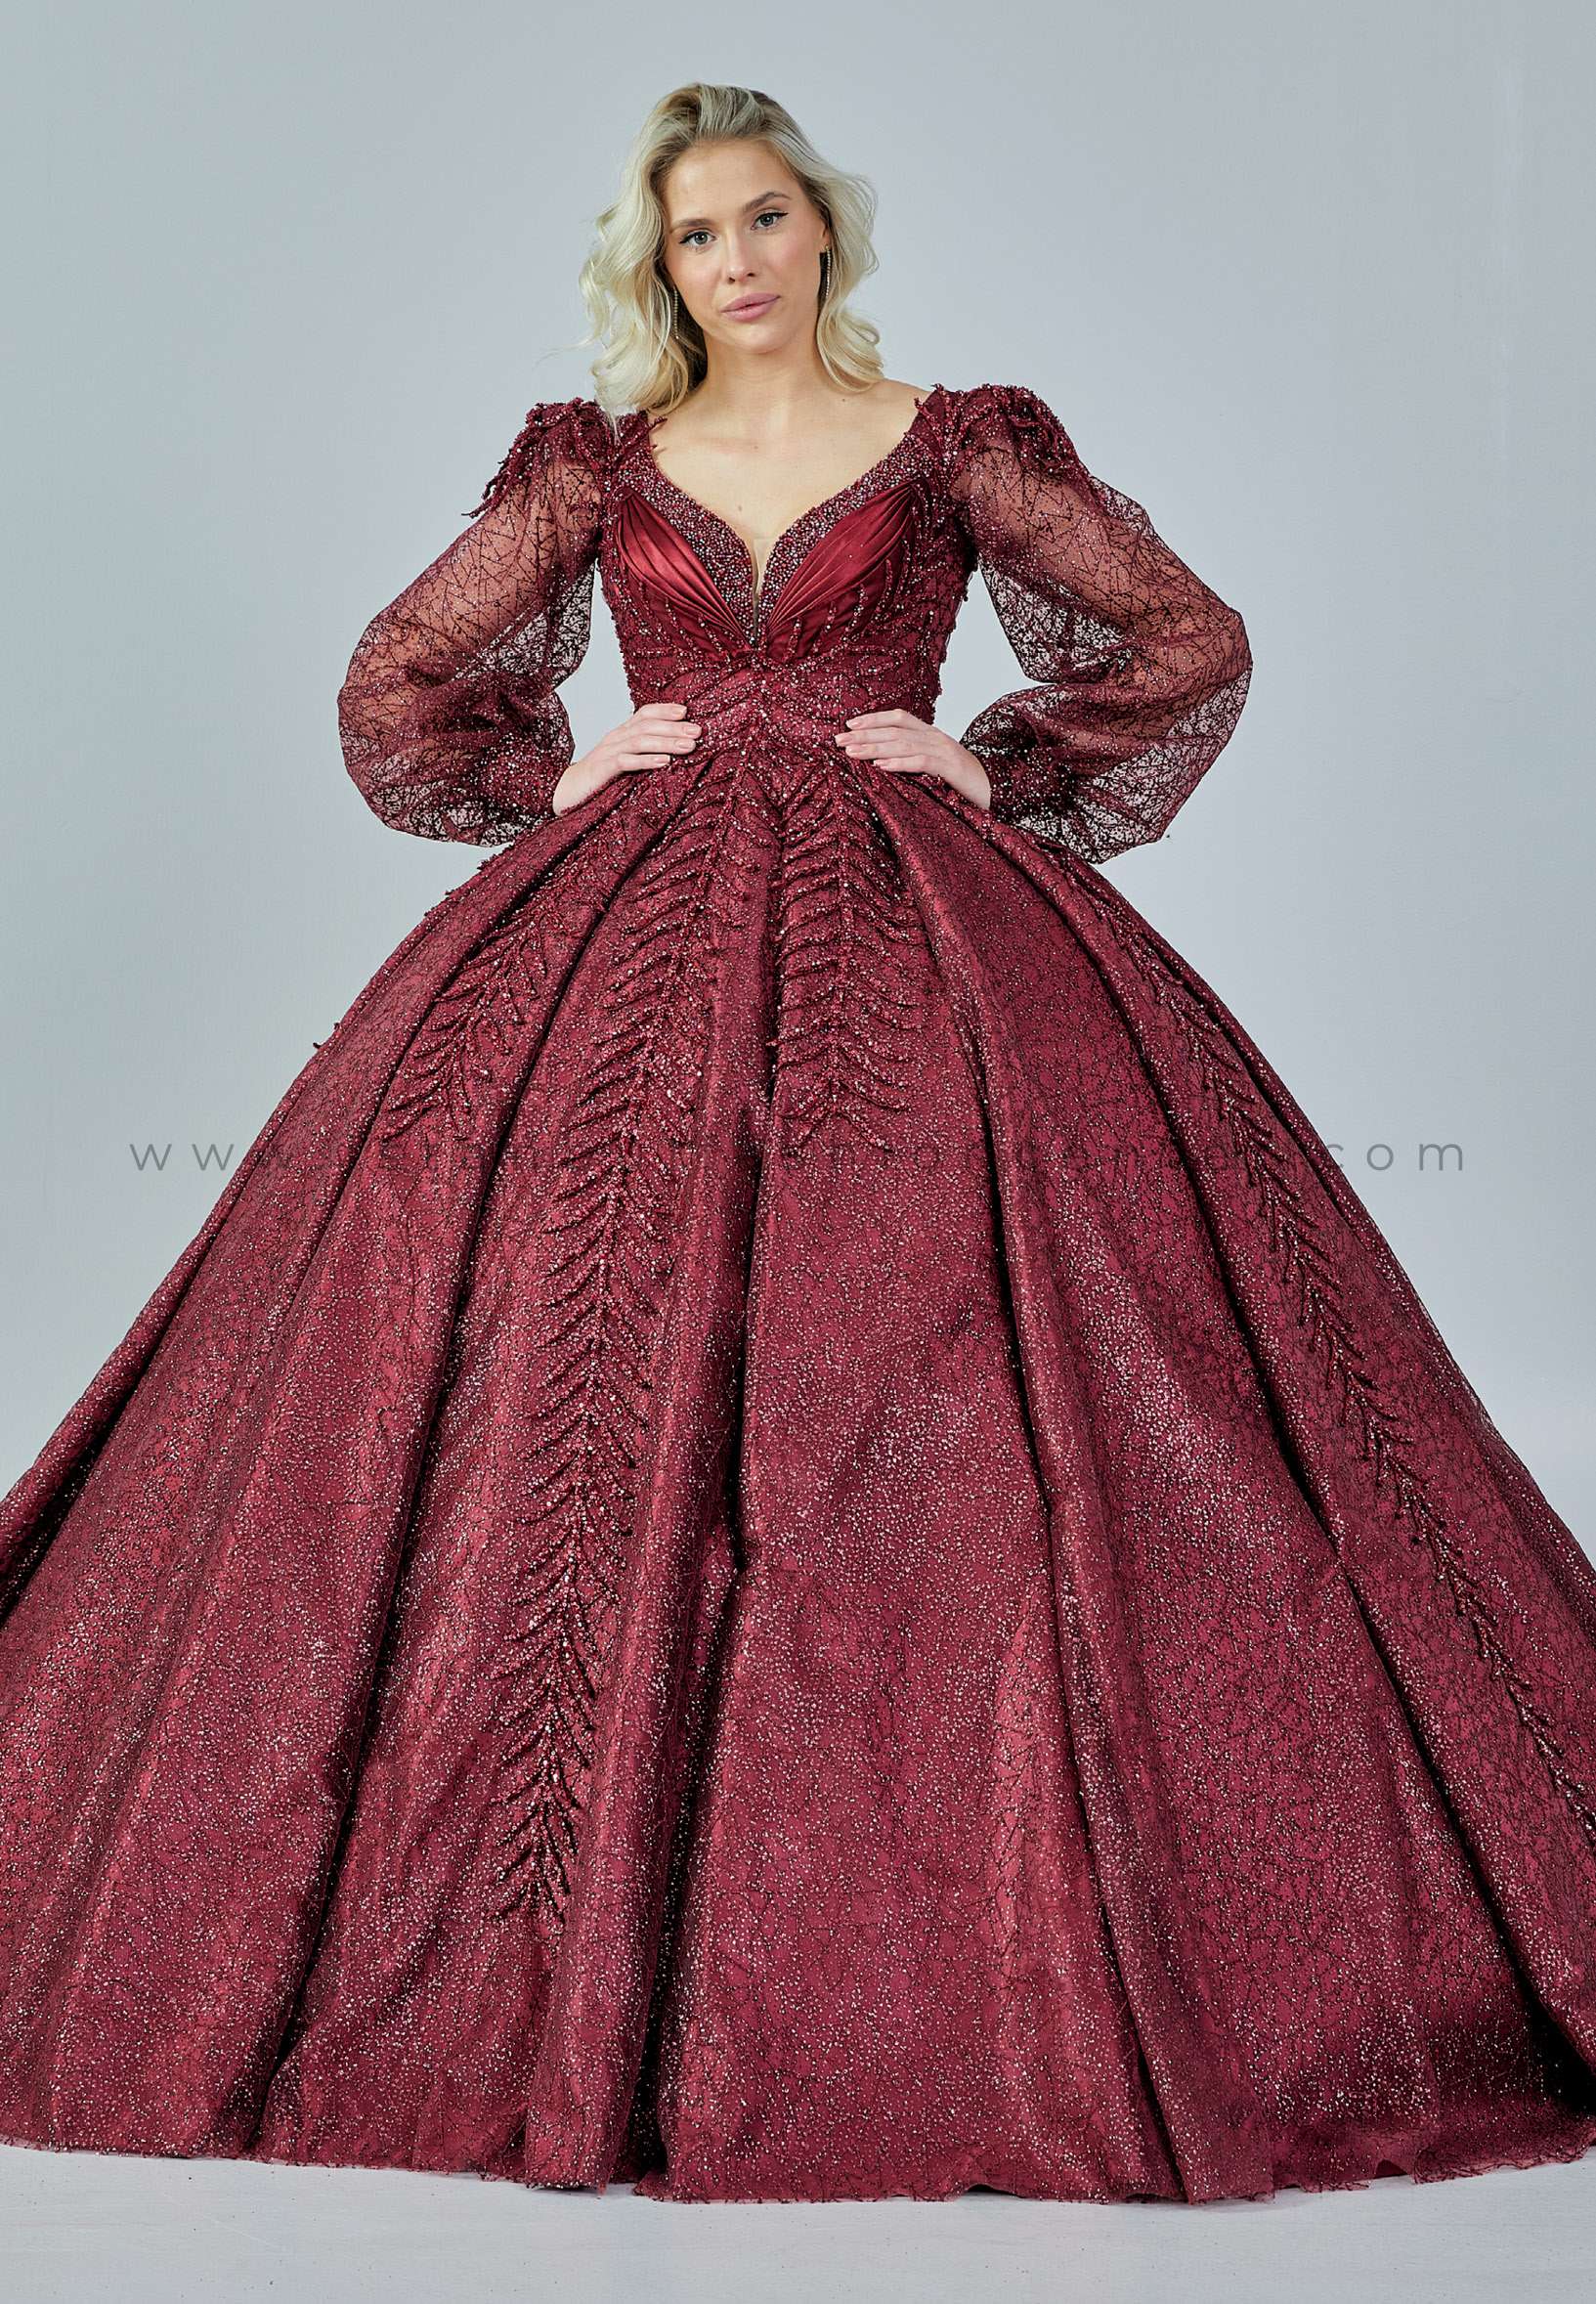 Red Rosette Flowers Off-shoulder Engagement Ball Gown - VQ